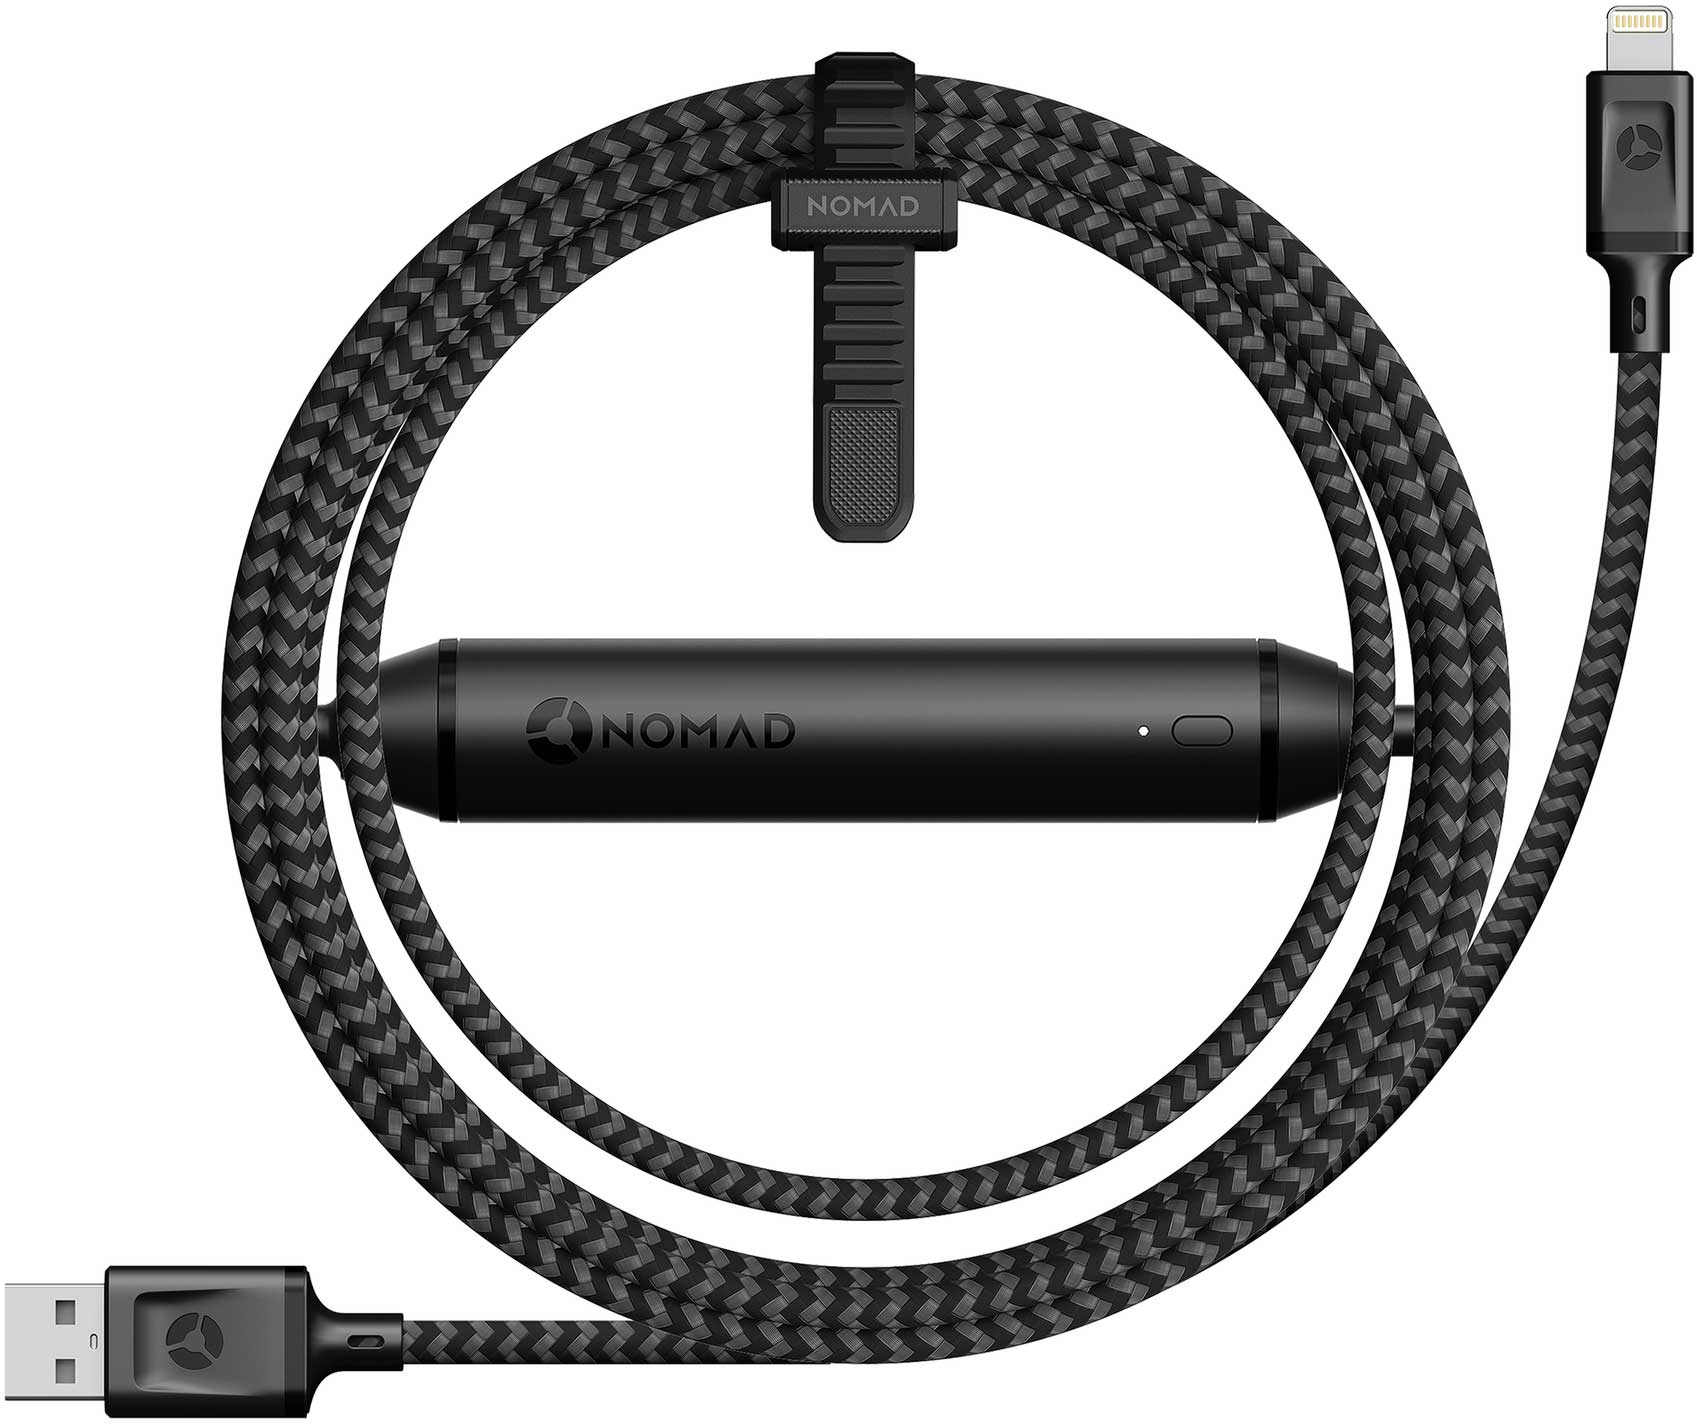 Nomad cables